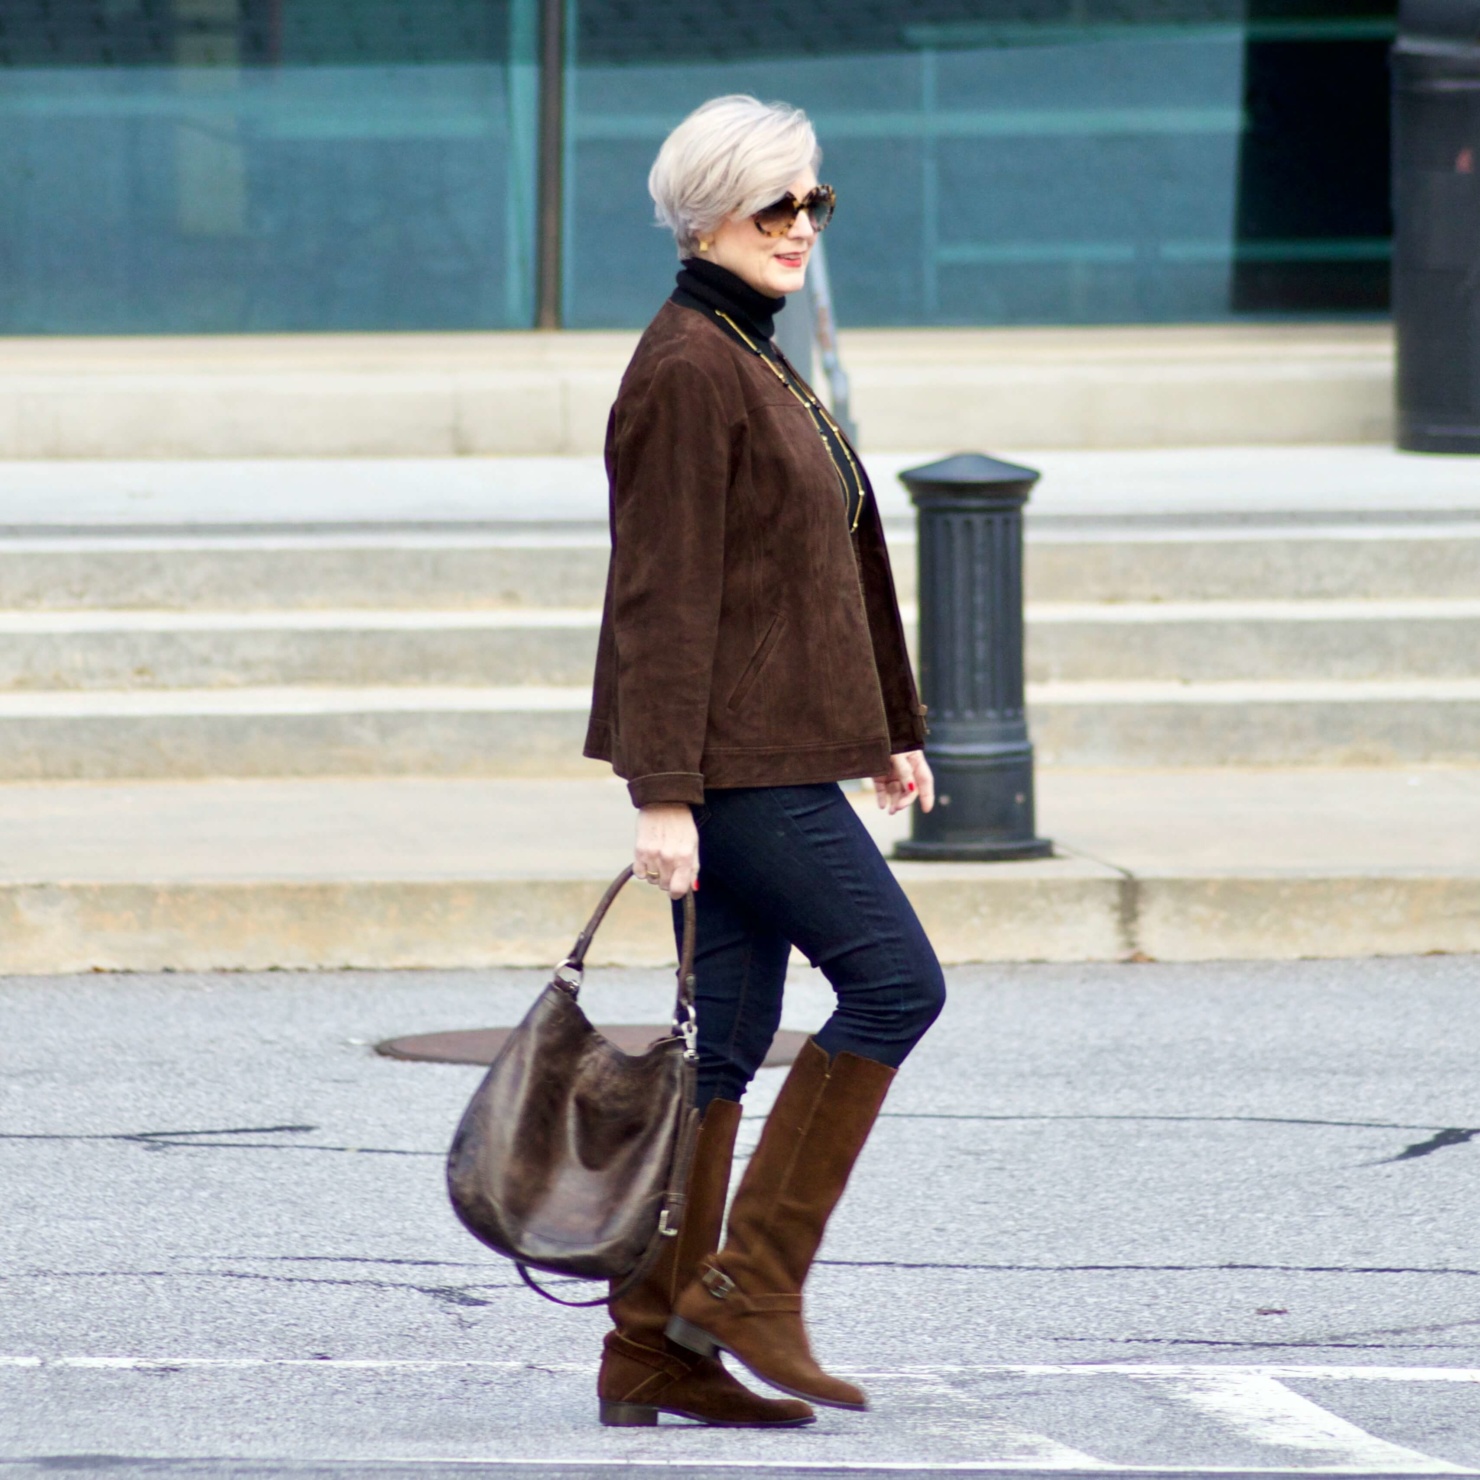 beth from Style at a Certain Age wears a black turtleneck, brown suede jacket, dark rinse denim and suede riding boots